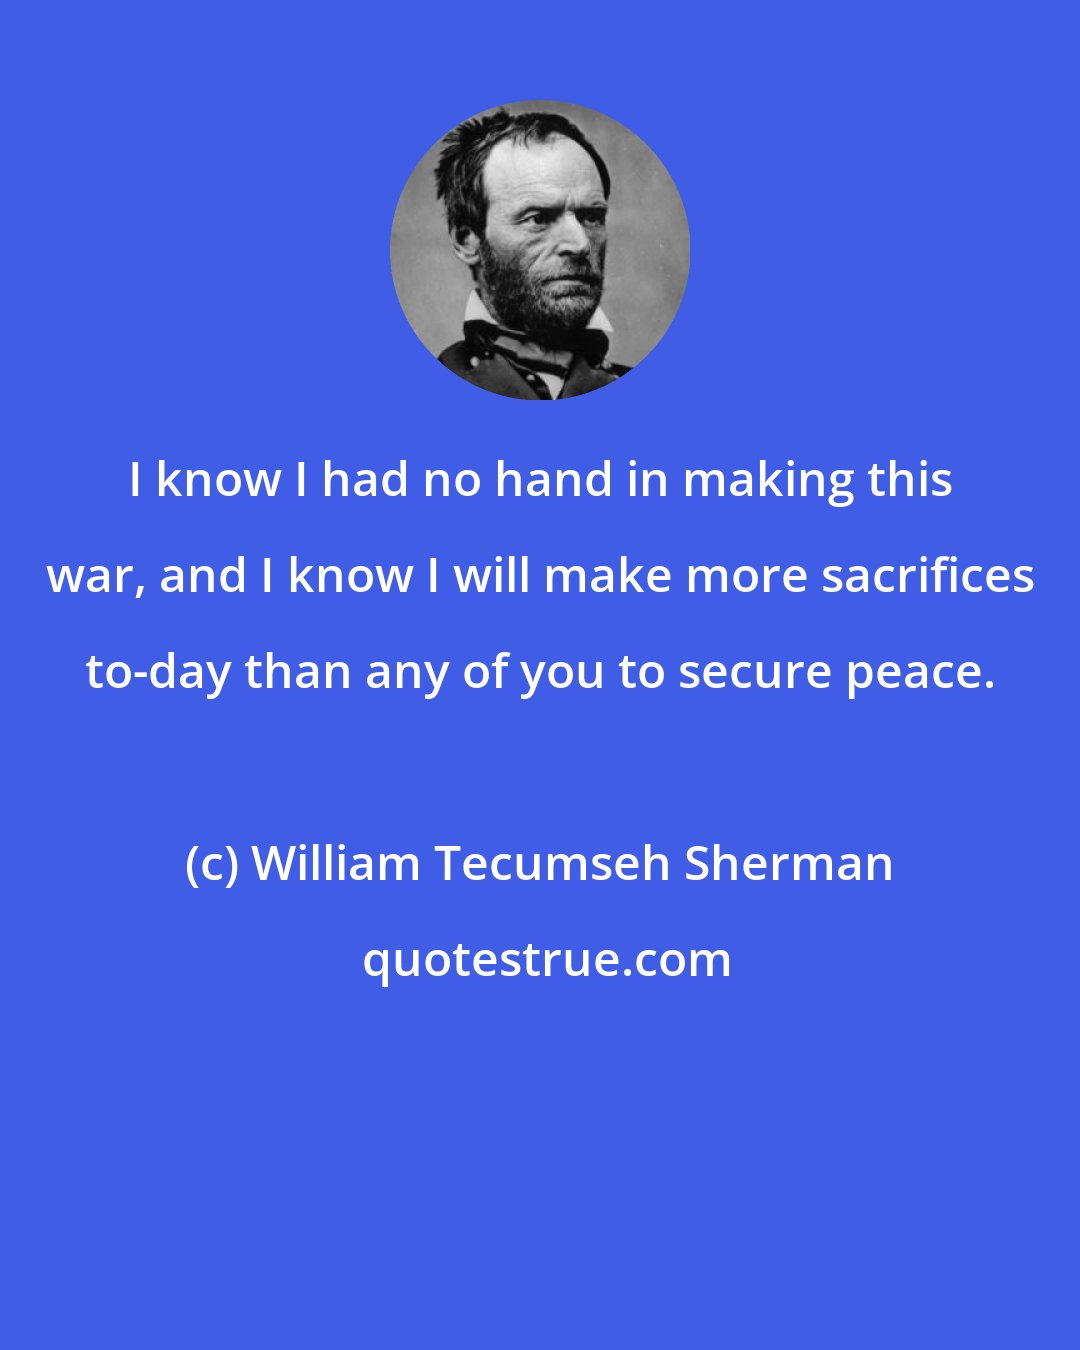 William Tecumseh Sherman: I know I had no hand in making this war, and I know I will make more sacrifices to-day than any of you to secure peace.